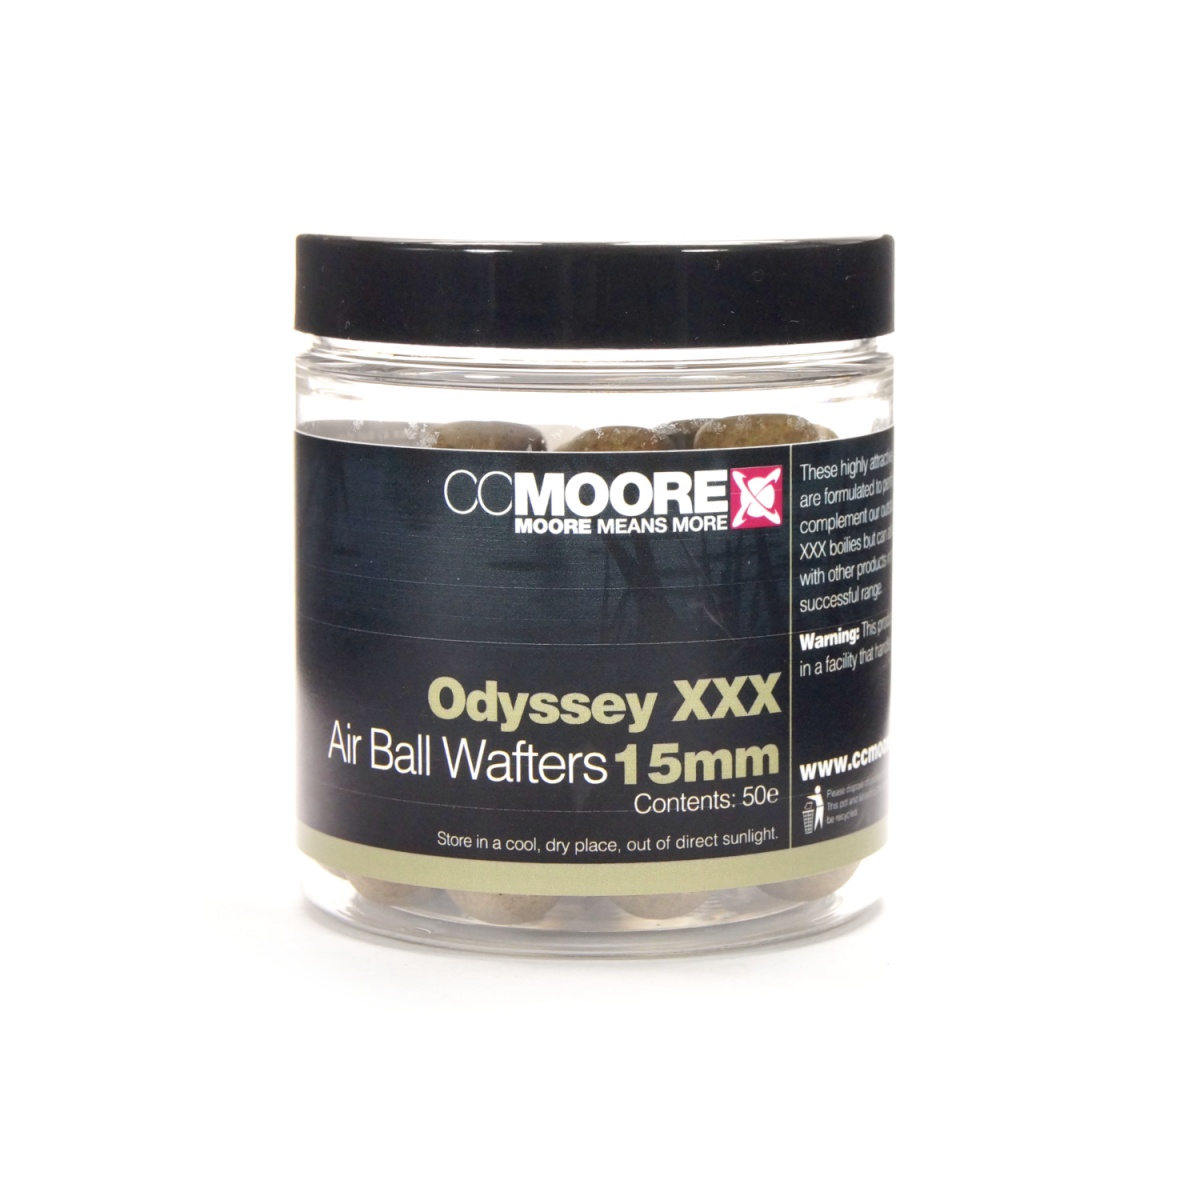 NEW CcMoore Air Ball Wafters Odyssey XXX 15 mm rozmiar